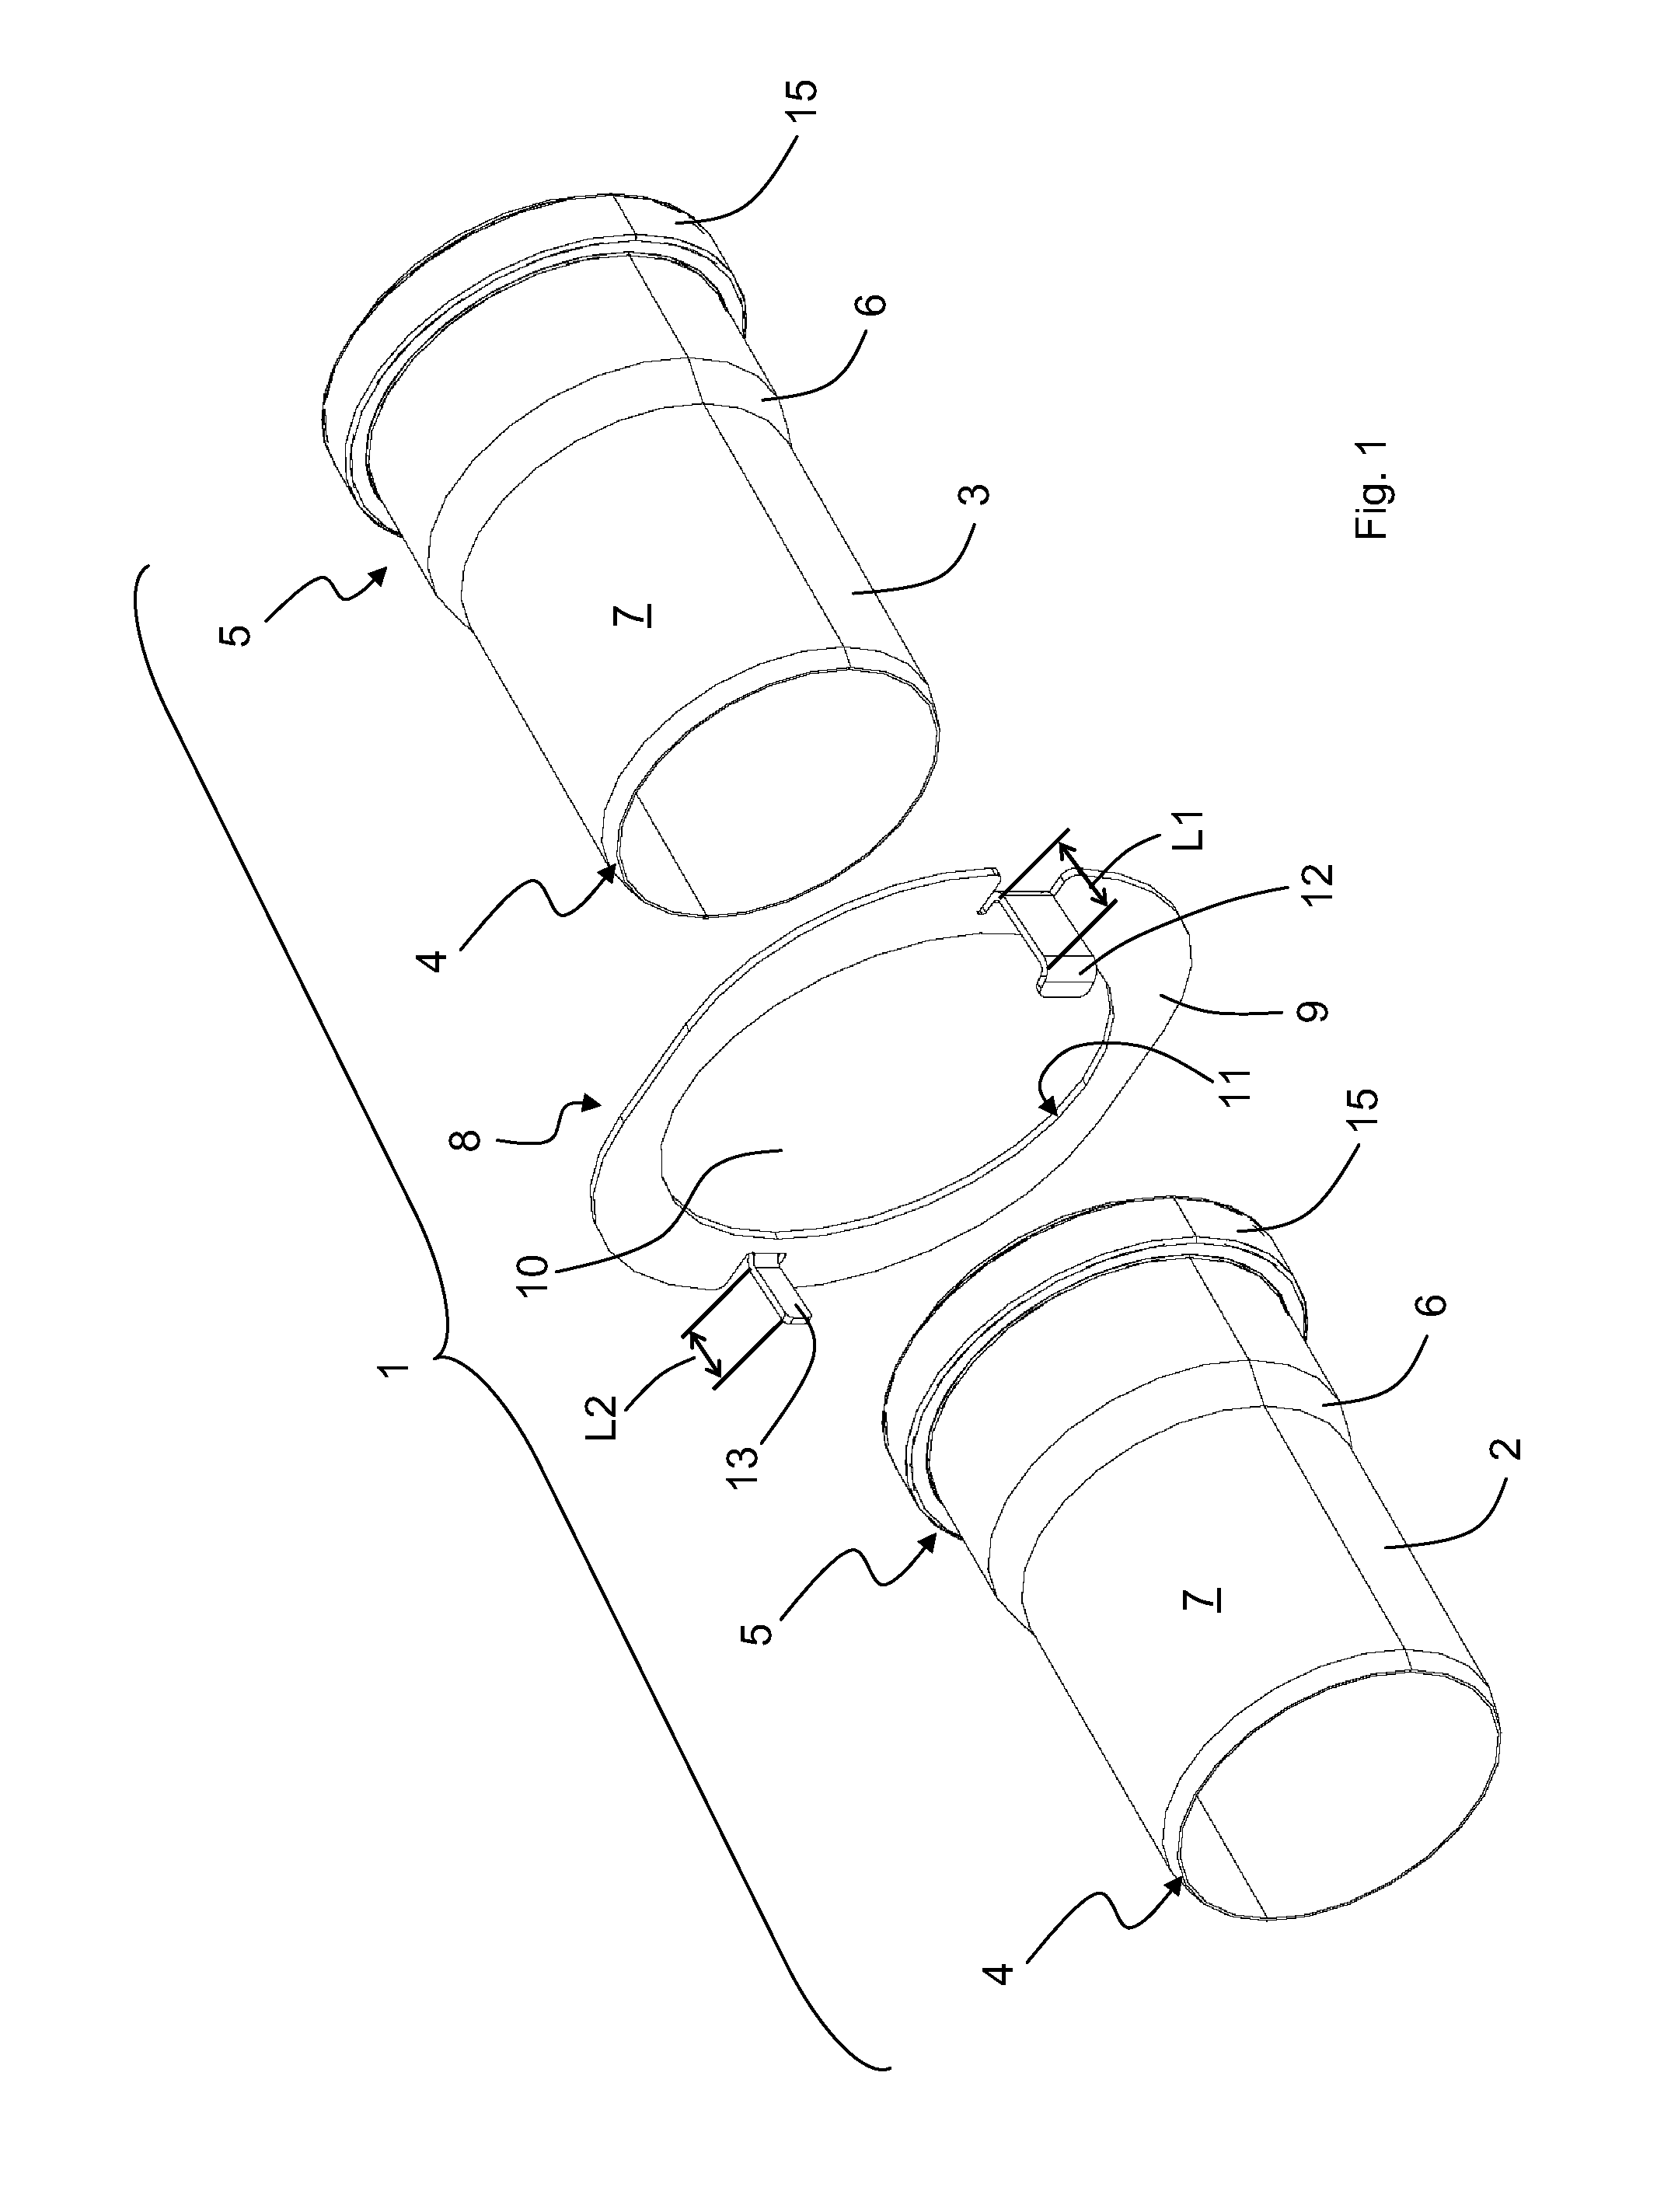 Securing device of a fluid line connection